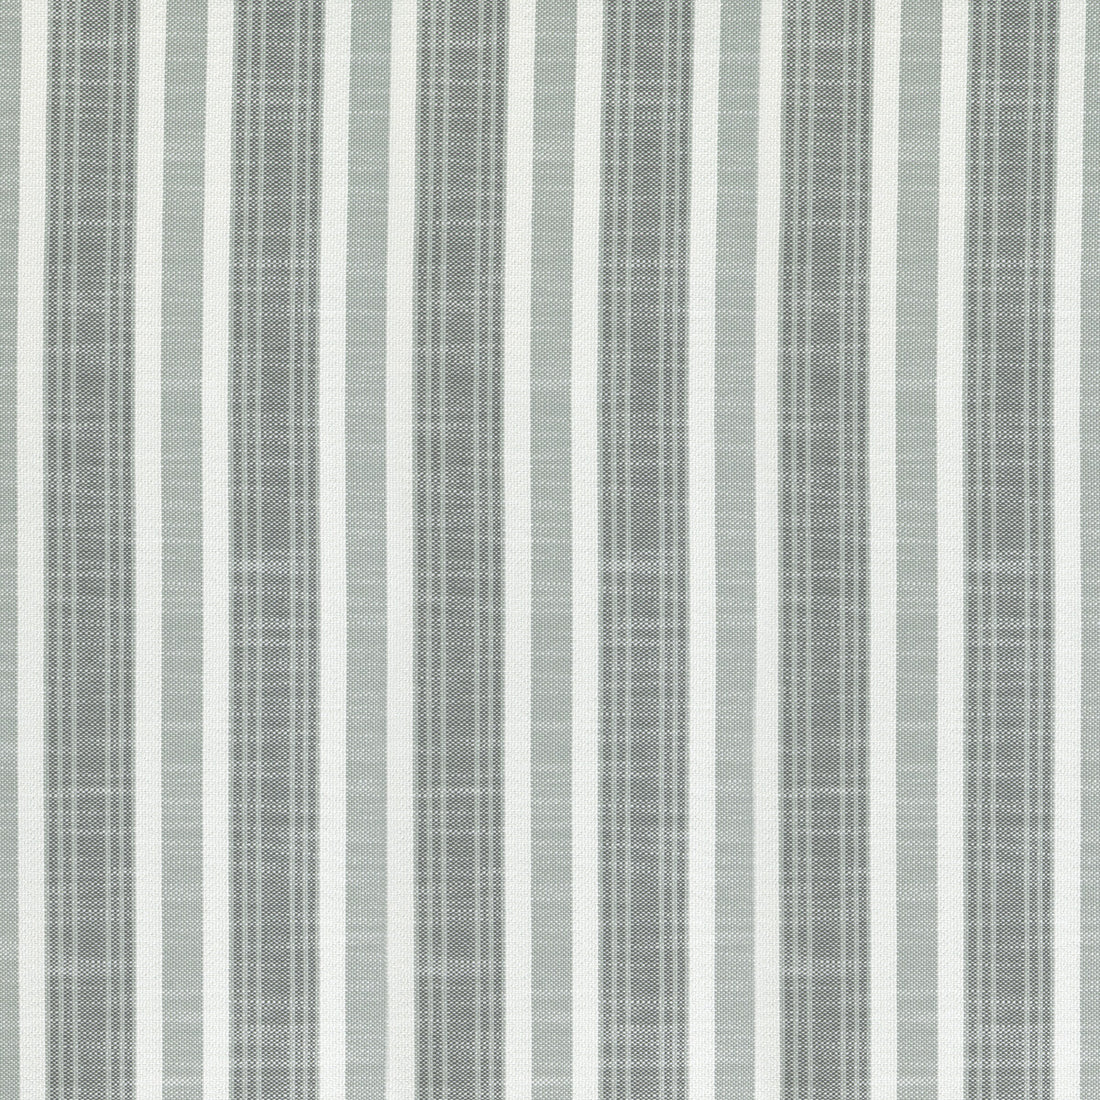 Sims Stripe fabric in graphite color - pattern 37046.1121.0 - by Kravet Design in the Thom Filicia Latitude collection